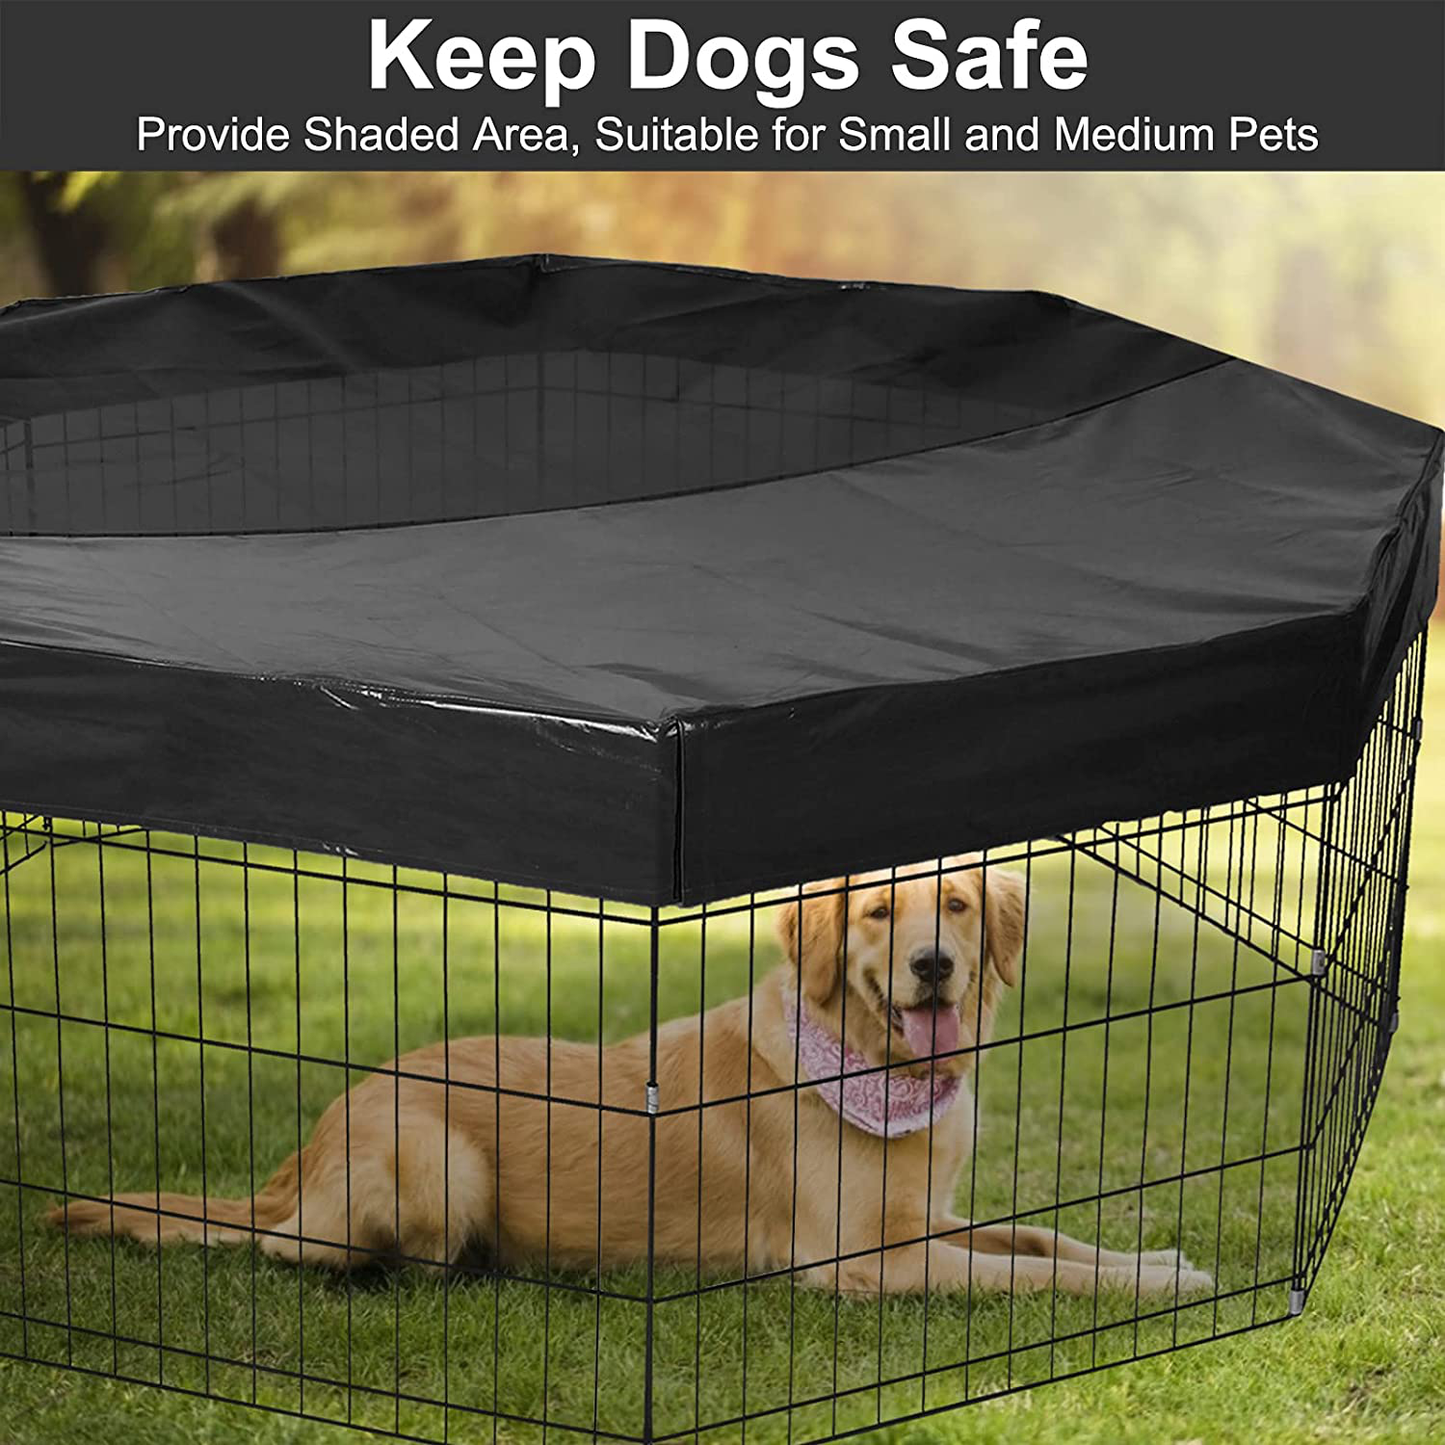 GORUTIN Dog Playpen Cover, Pet Playpen Mesh Top Cover Protect Dog from Sun/Rain Prevent Escape, Dog Pen Cover Shaded Area Indoor Outdoor Fits 24 Inch 8 Panels Playpen (Sell Top Cover Only!)